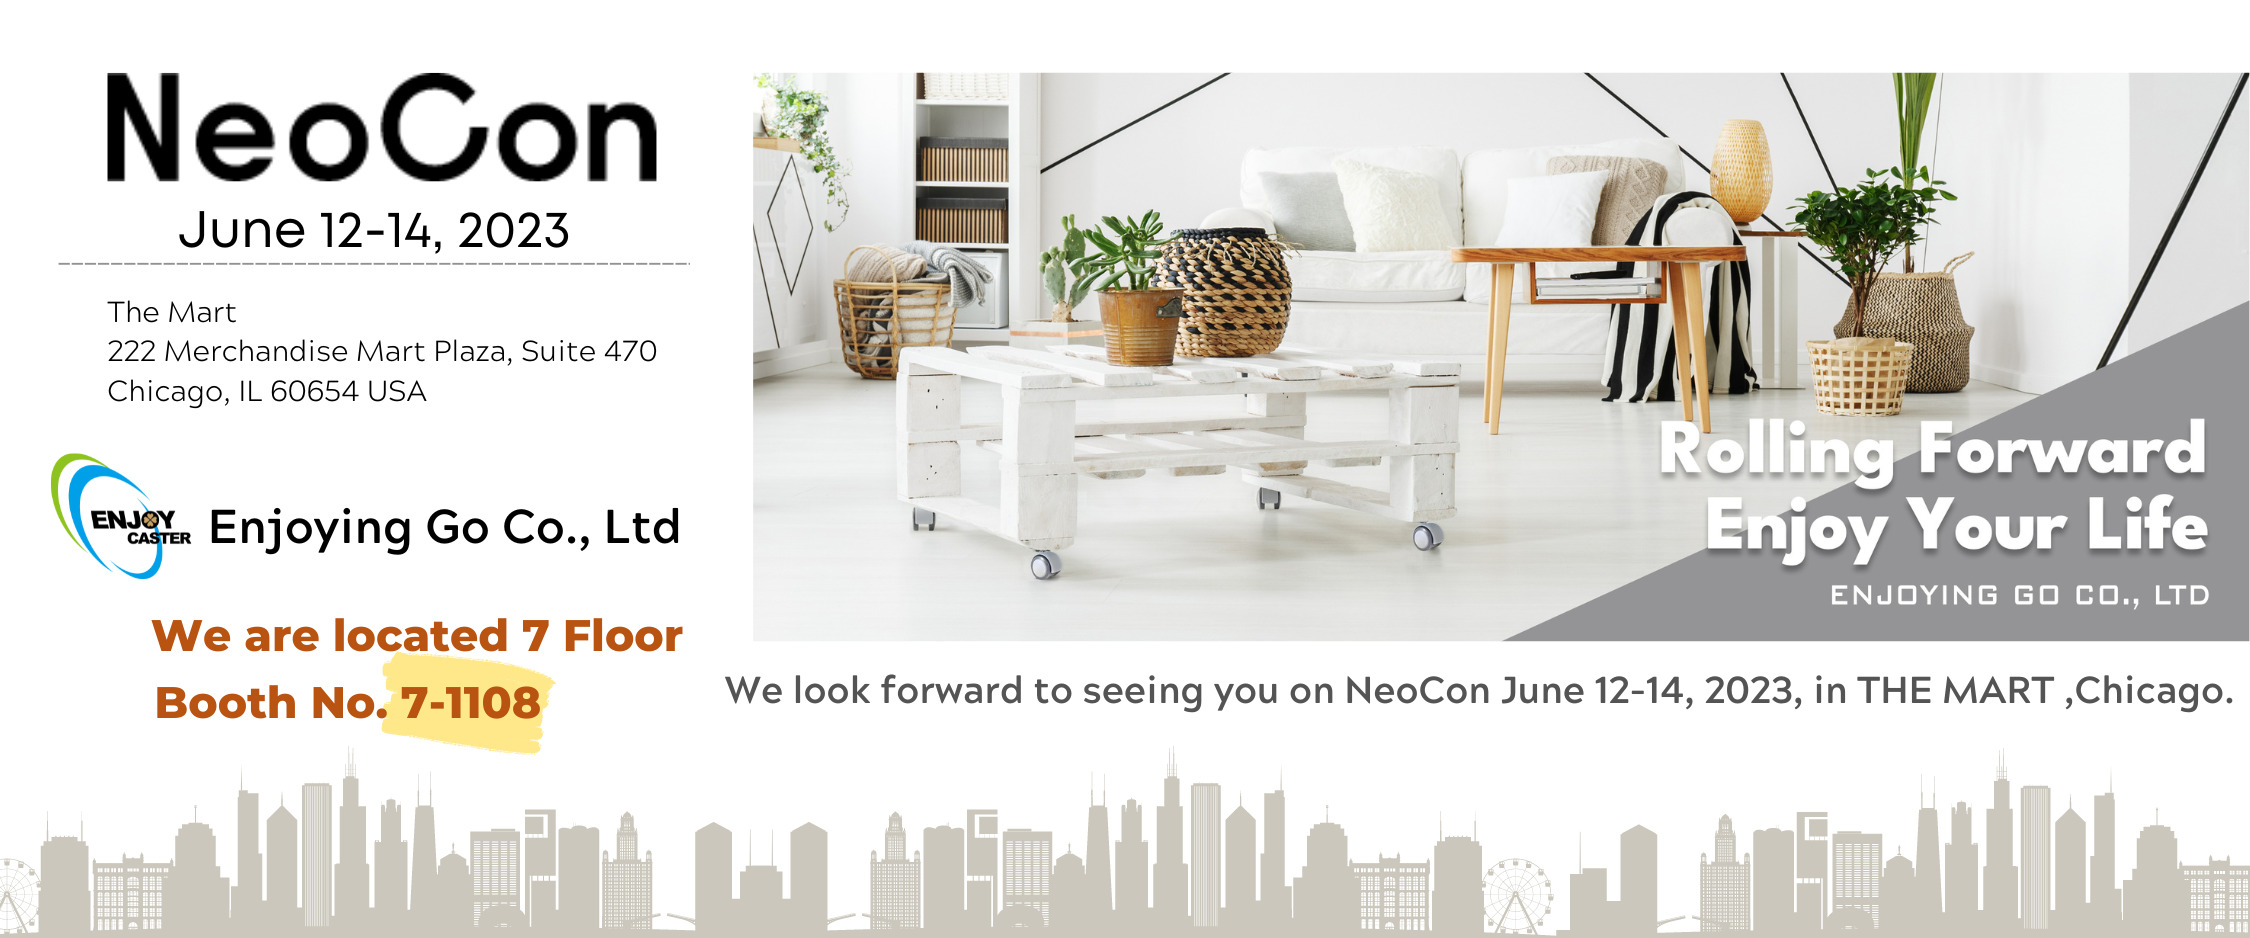 Join us at the Neocon exhibition from June 12 to 14